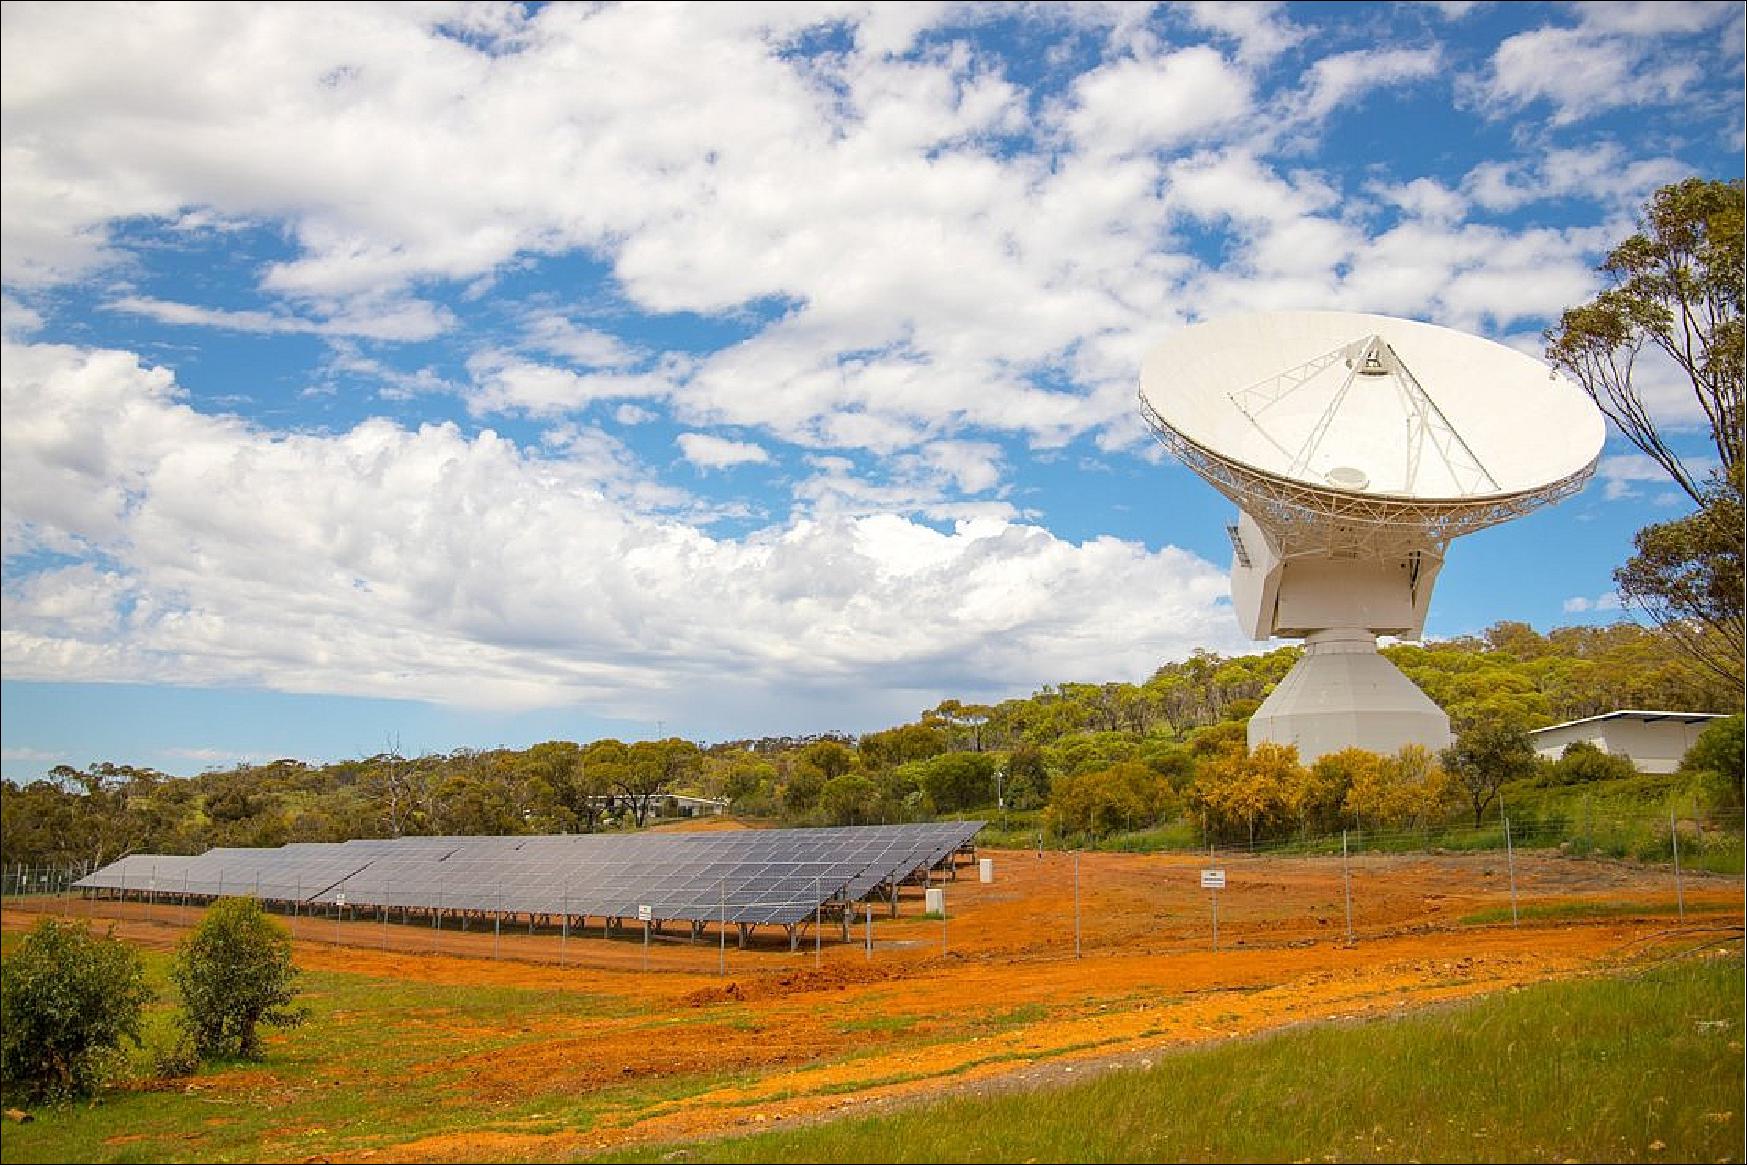 Figure 27: ESA's deep-space antenna in New Norcia, Western Australia, has now been powered by solar energy for over a year, in the first step towards creating a green network of eyes on the skies (image credit: ESA/D. O'Donnell, CC BY-SA 3.0 IGO)